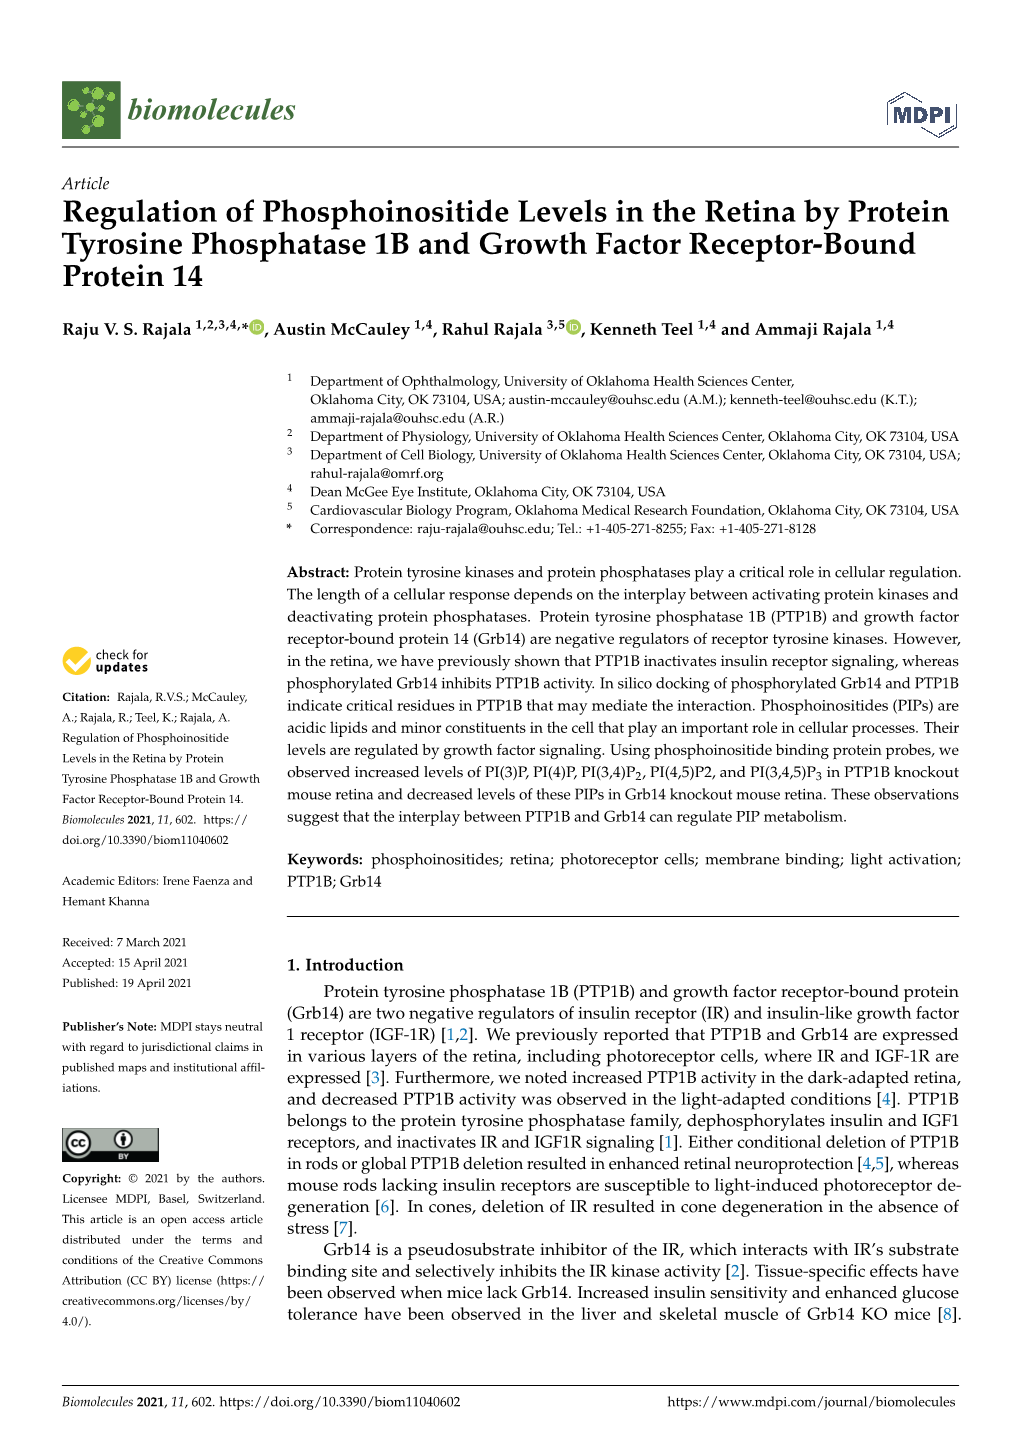 Regulation of Phosphoinositide Levels in the Retina by Protein Tyrosine Phosphatase 1B and Growth Factor Receptor-Bound Protein 14